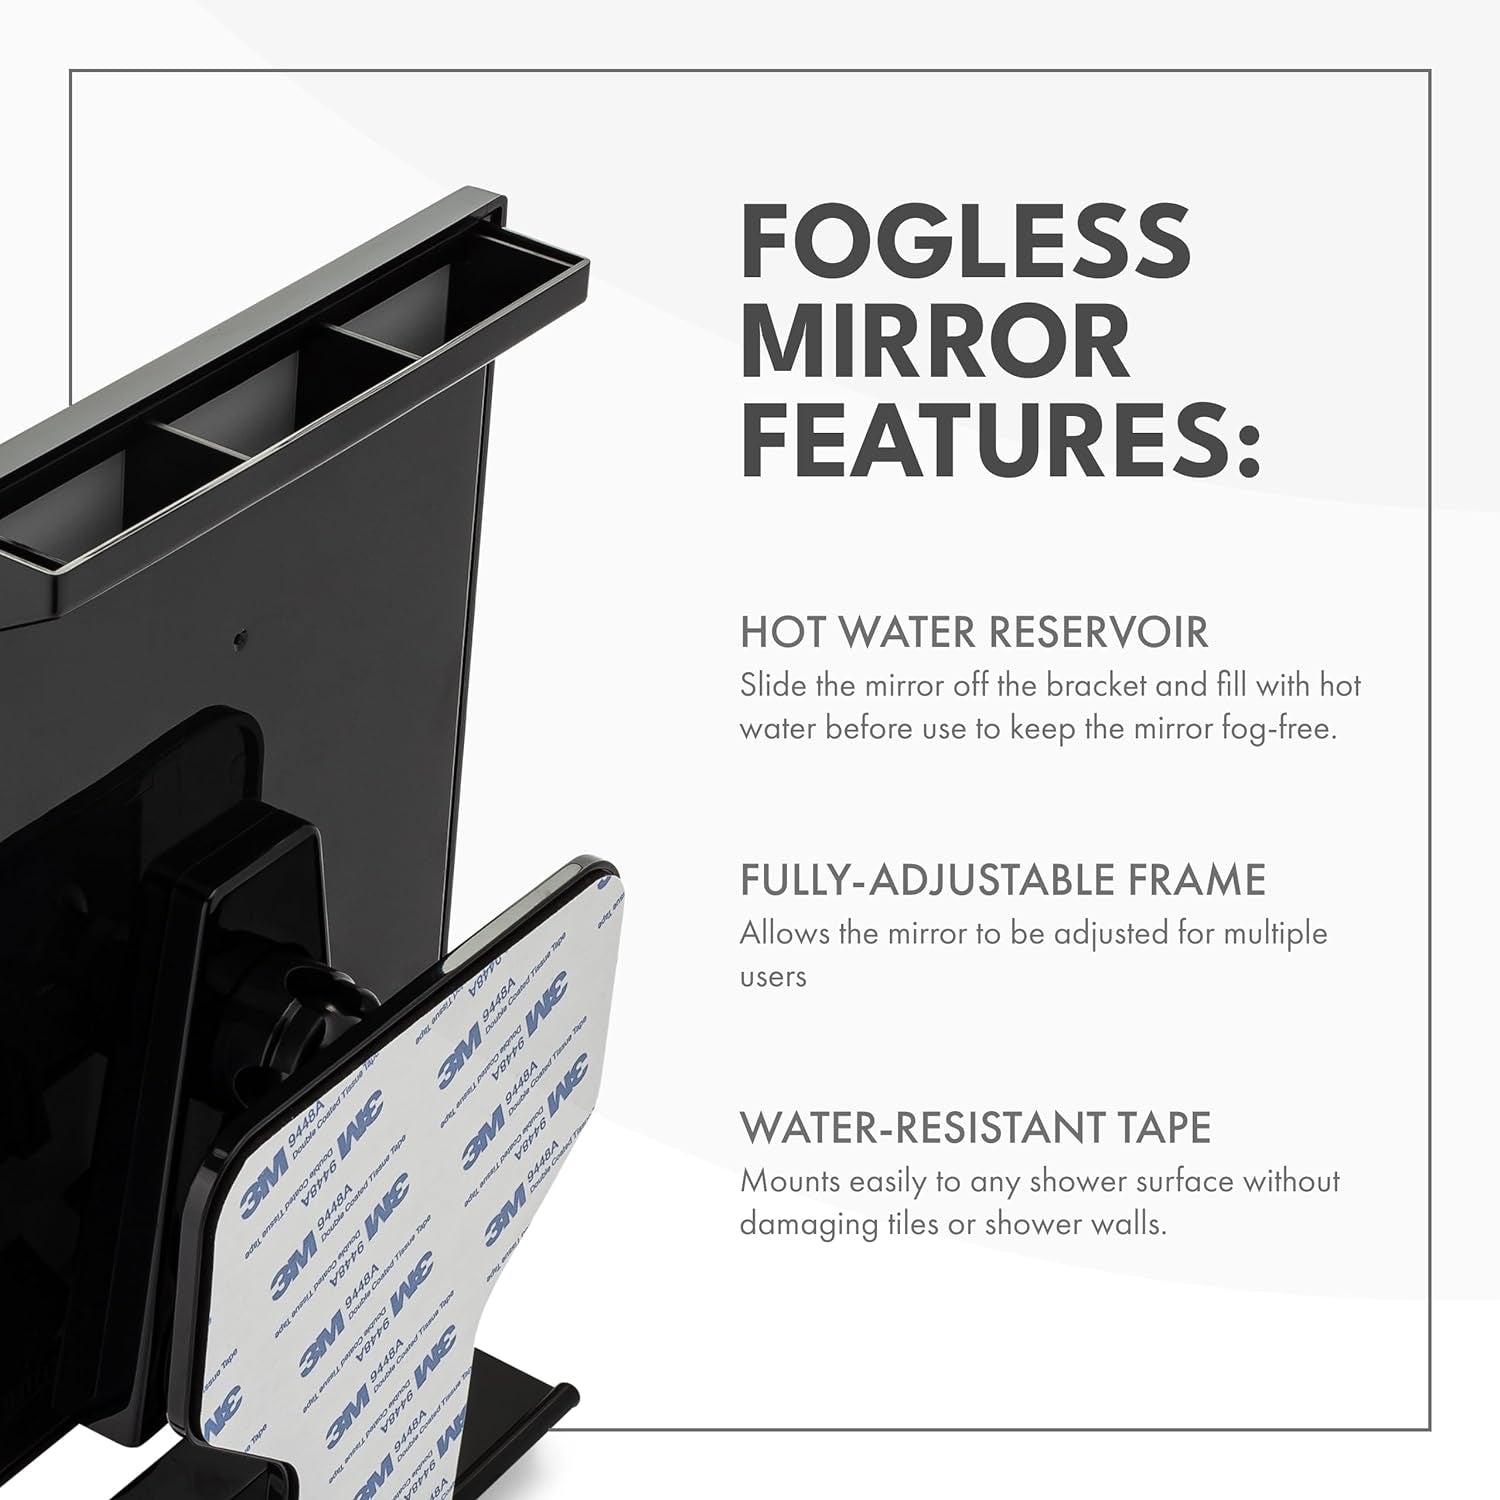 Fogless Shower Mirror - Anti-Fog Mirror - Adjustable Shaving Mirror with a Squeegee - Rust-Proof, Impact-Resistance Bathroom Shower Mirror - Tall